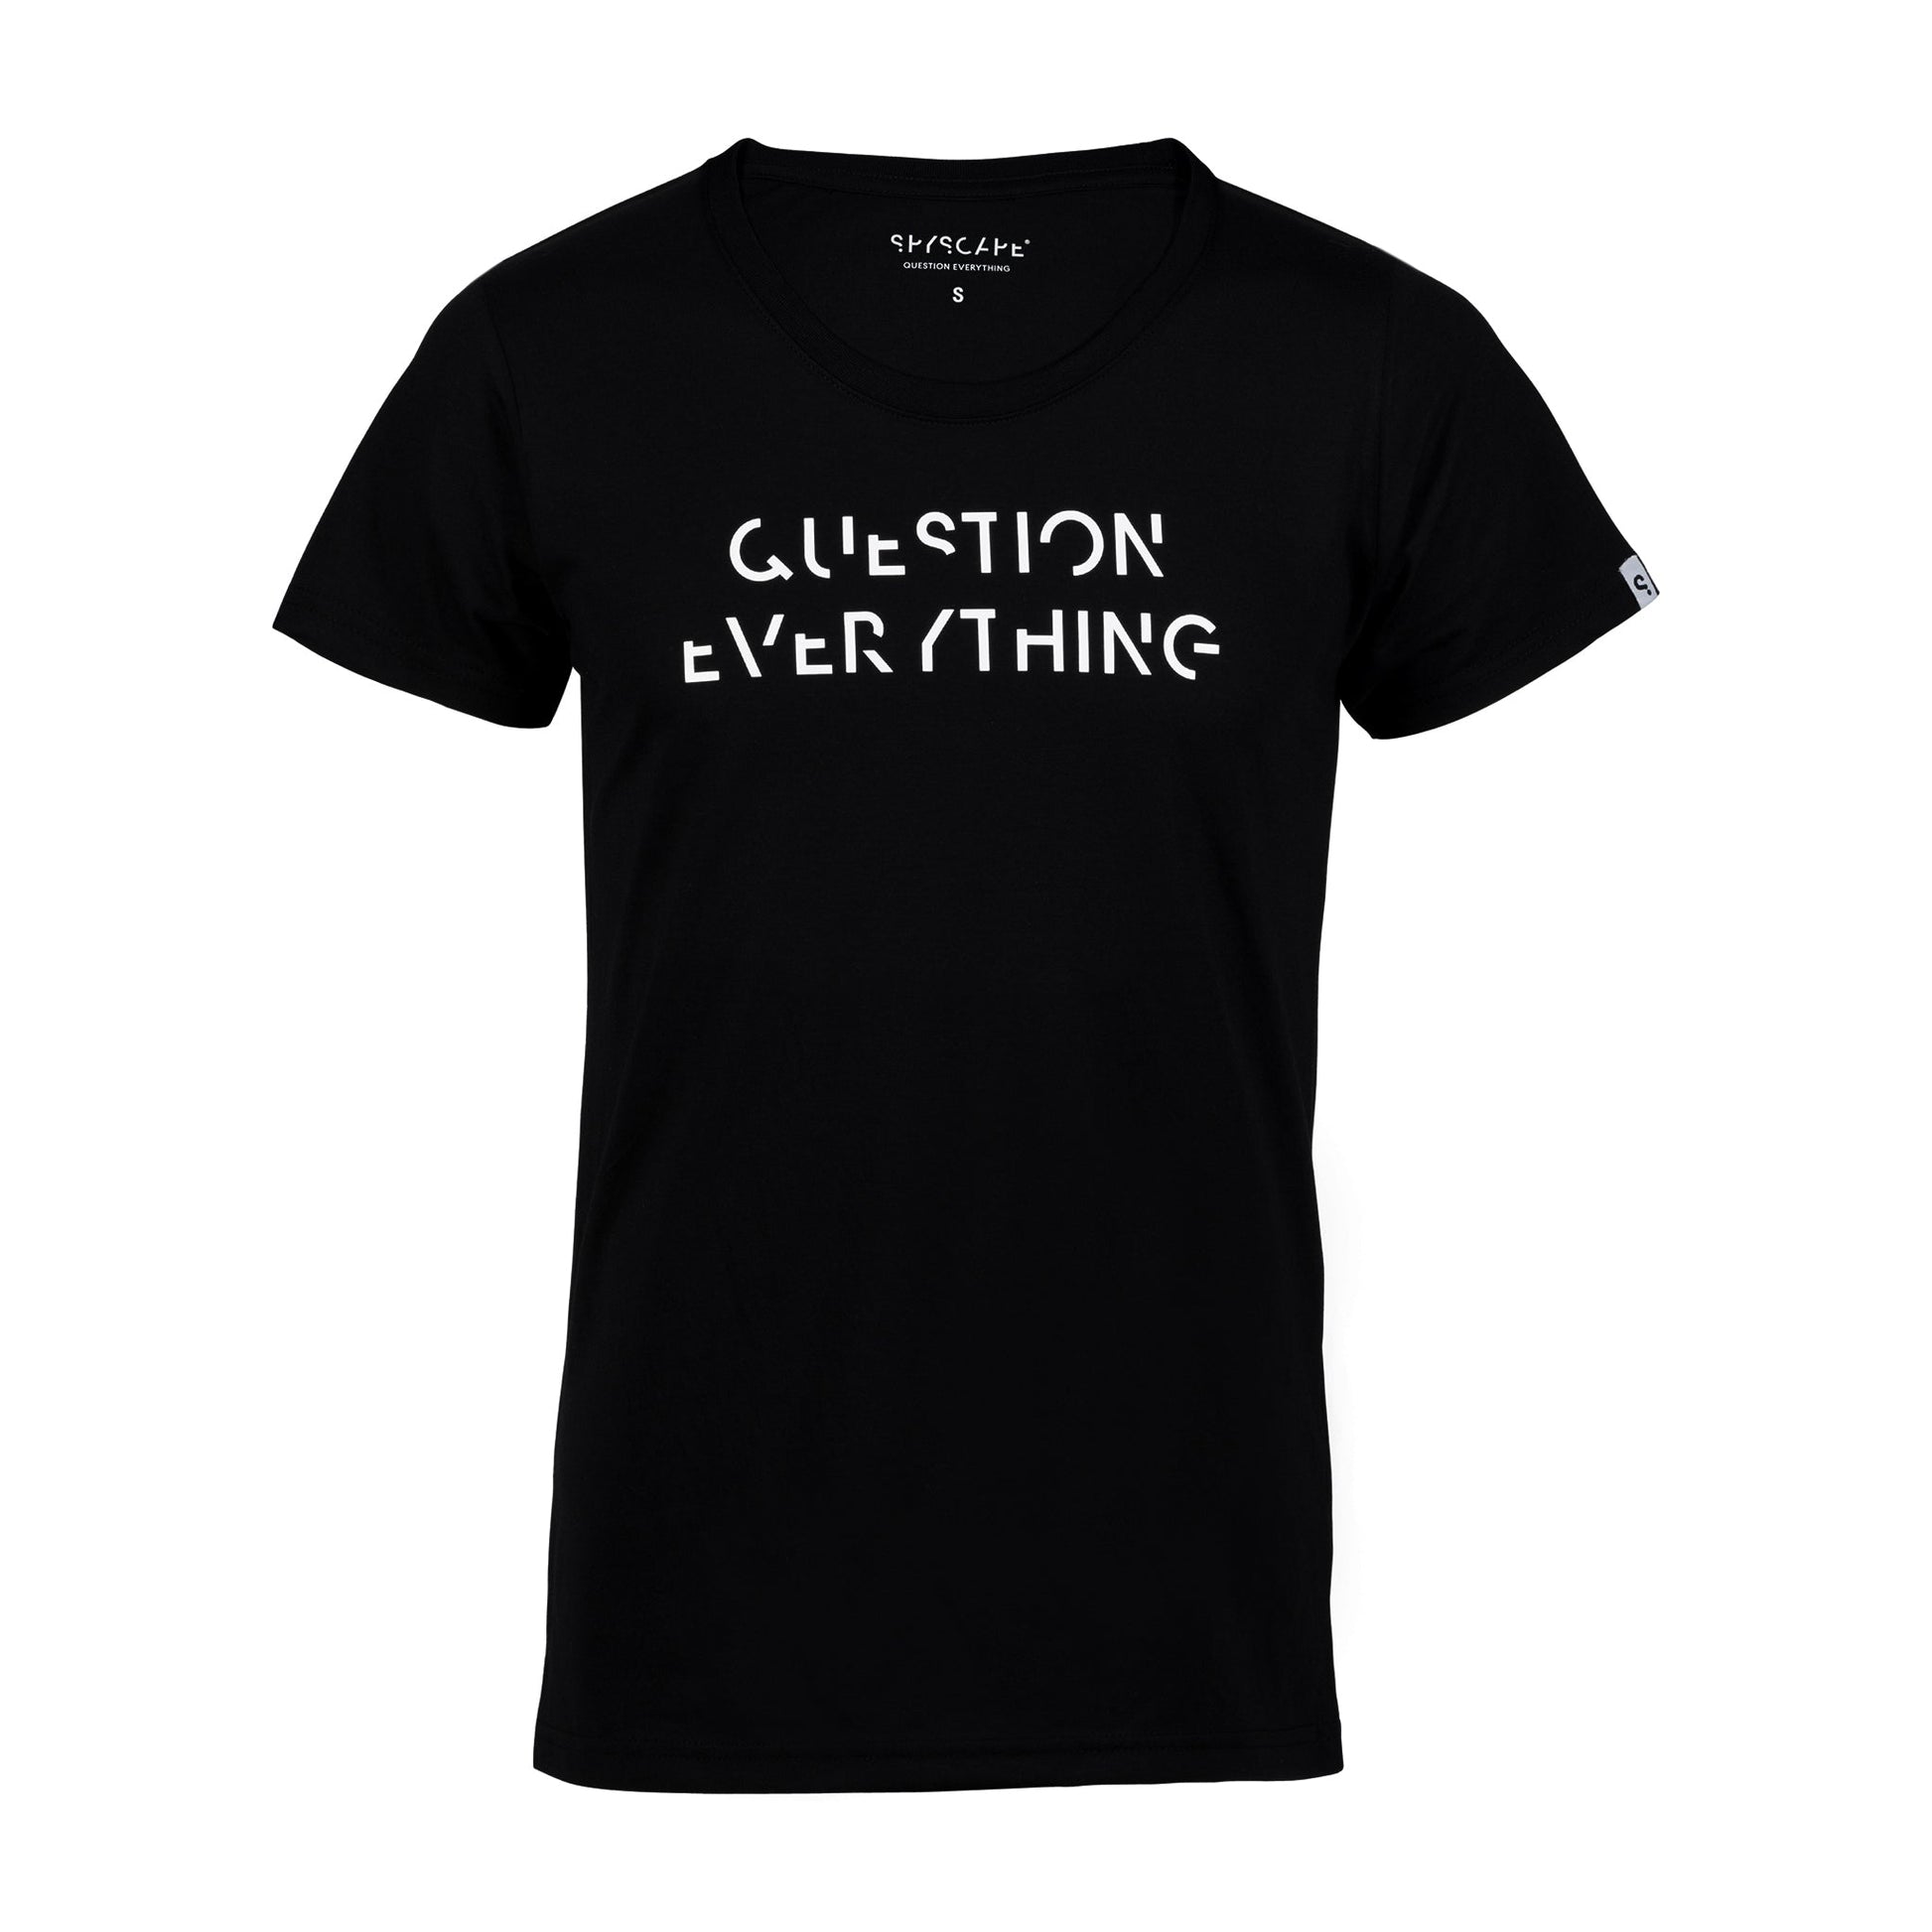 SPYSCAPE Question Everything Black - T-shirt - front view of t-shirt with QUESTION EVERYTHING on front of check 